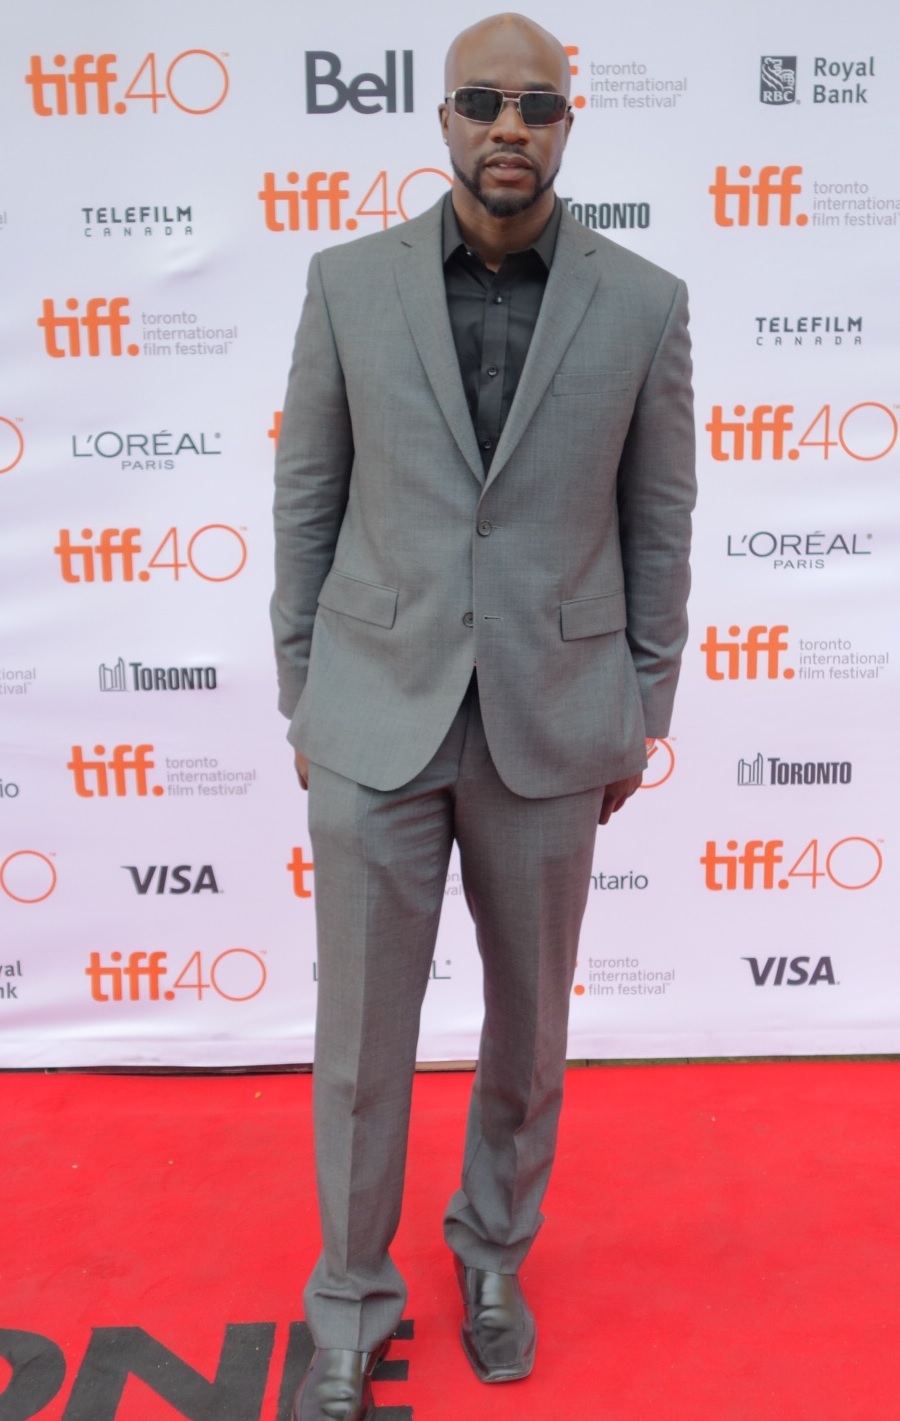 MICHAEL A. AMOS - Spotted outside TIFF Bell Lightbox at the 2015 Toronto International Film Festival